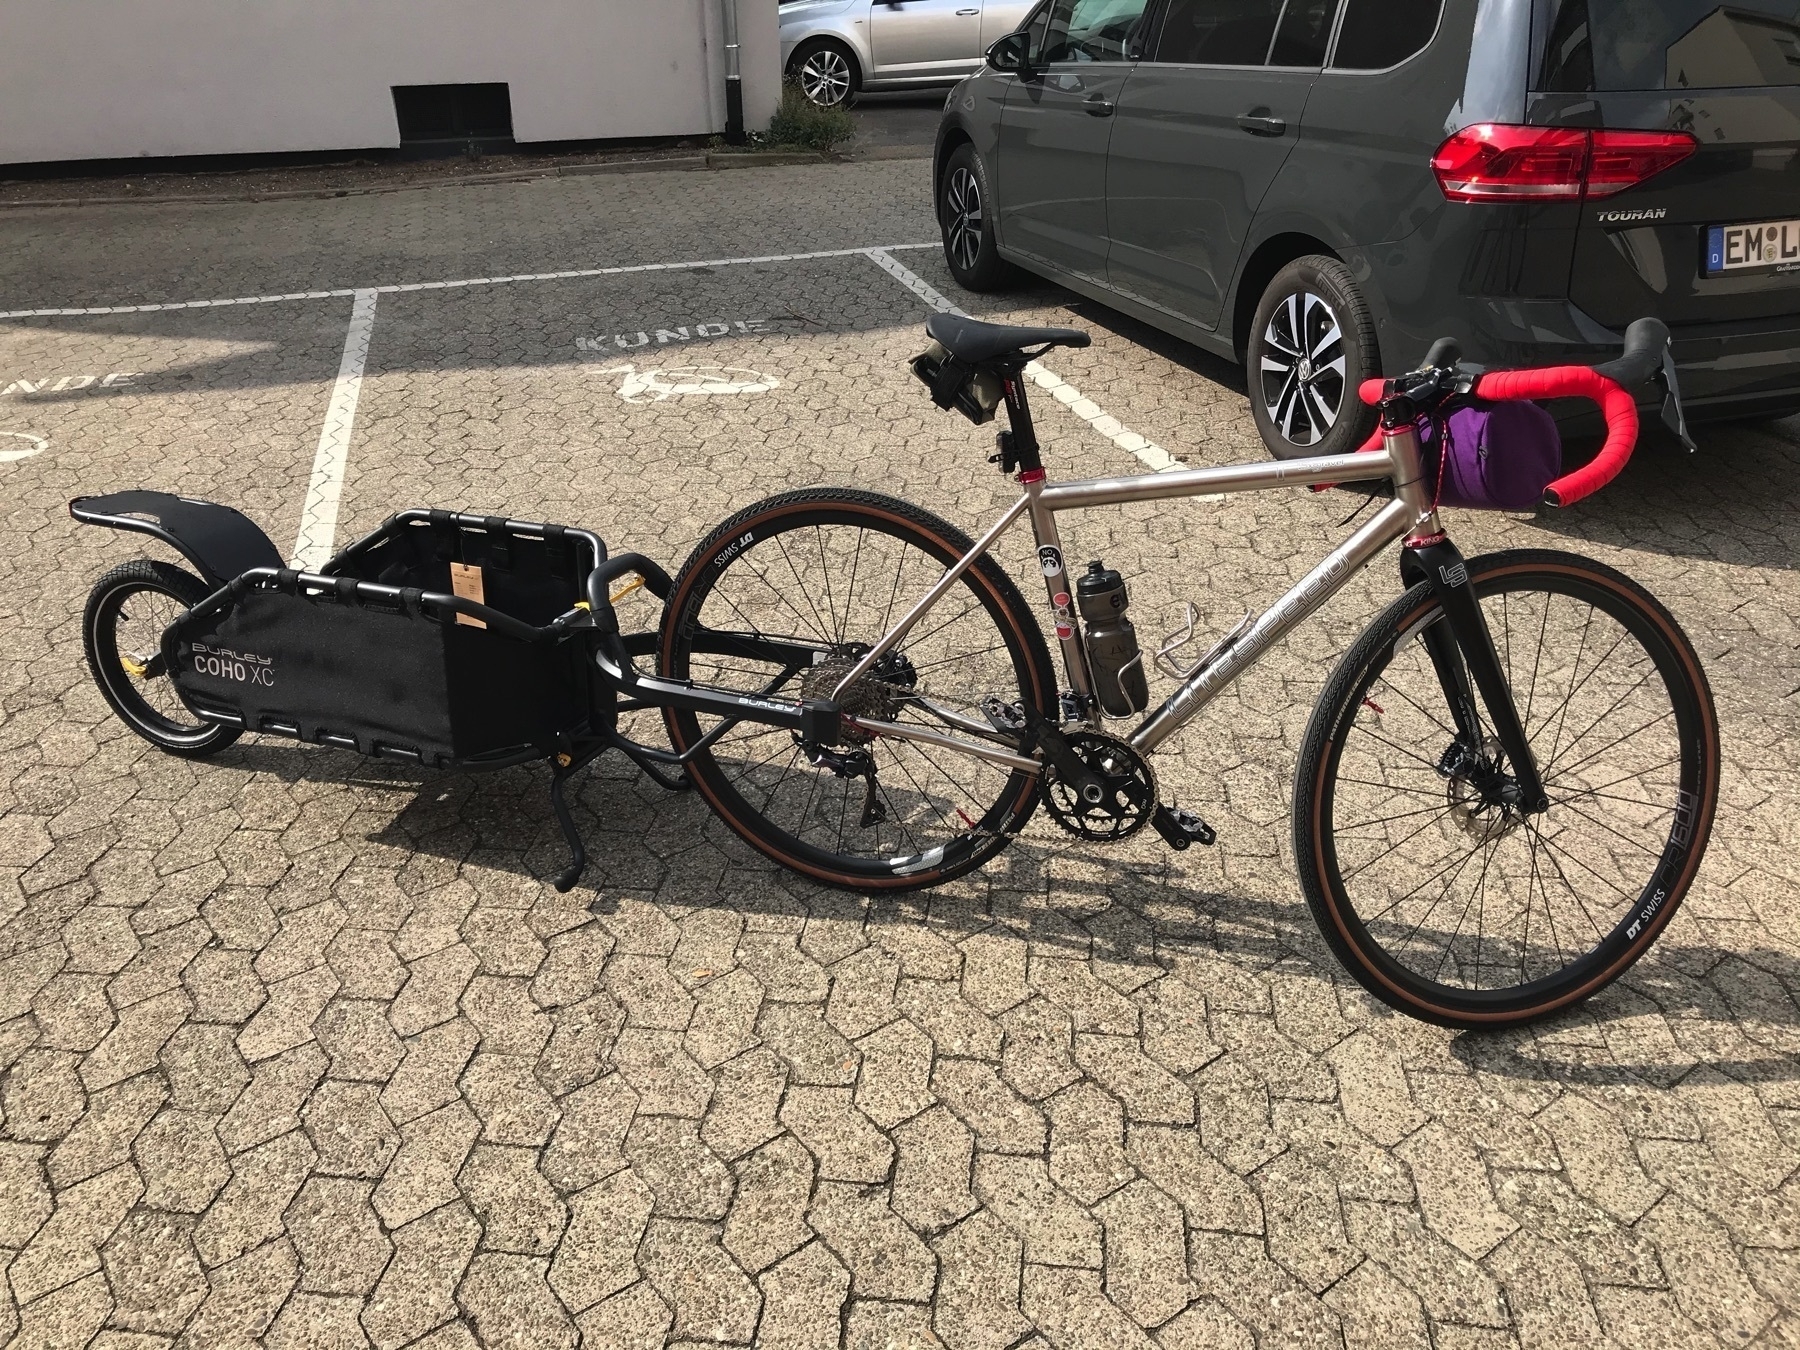 Drop bar, titanium gravel bike with a single-wheel cargo trailer attached to the rear axle in a parking lot.